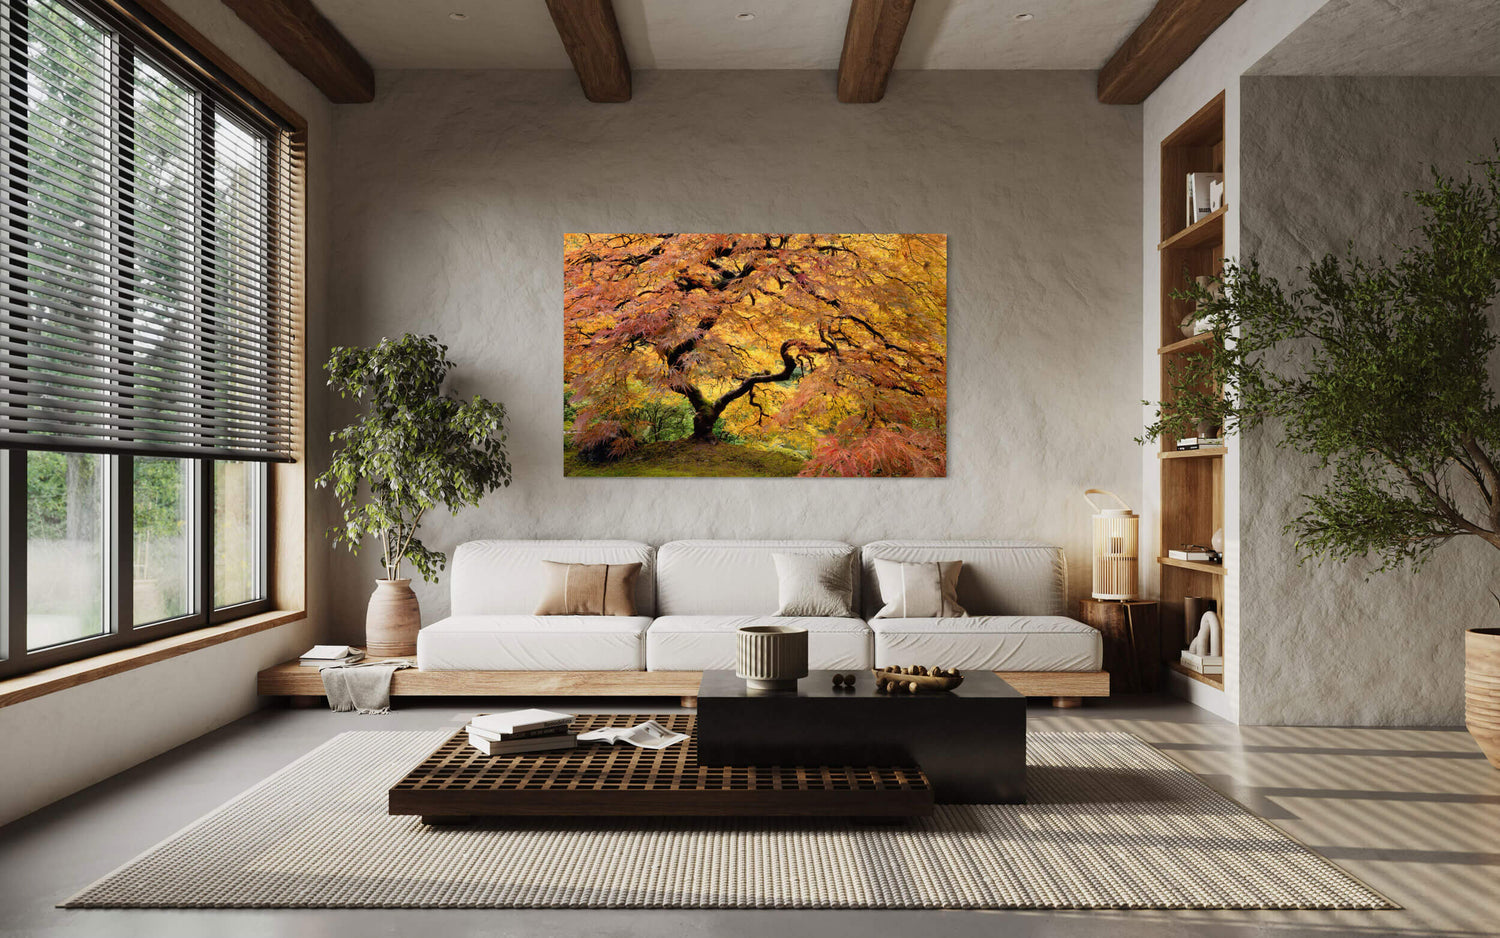 A piece of Japanese Garden art showing the famous maple tree in Portland hangs in a living room.